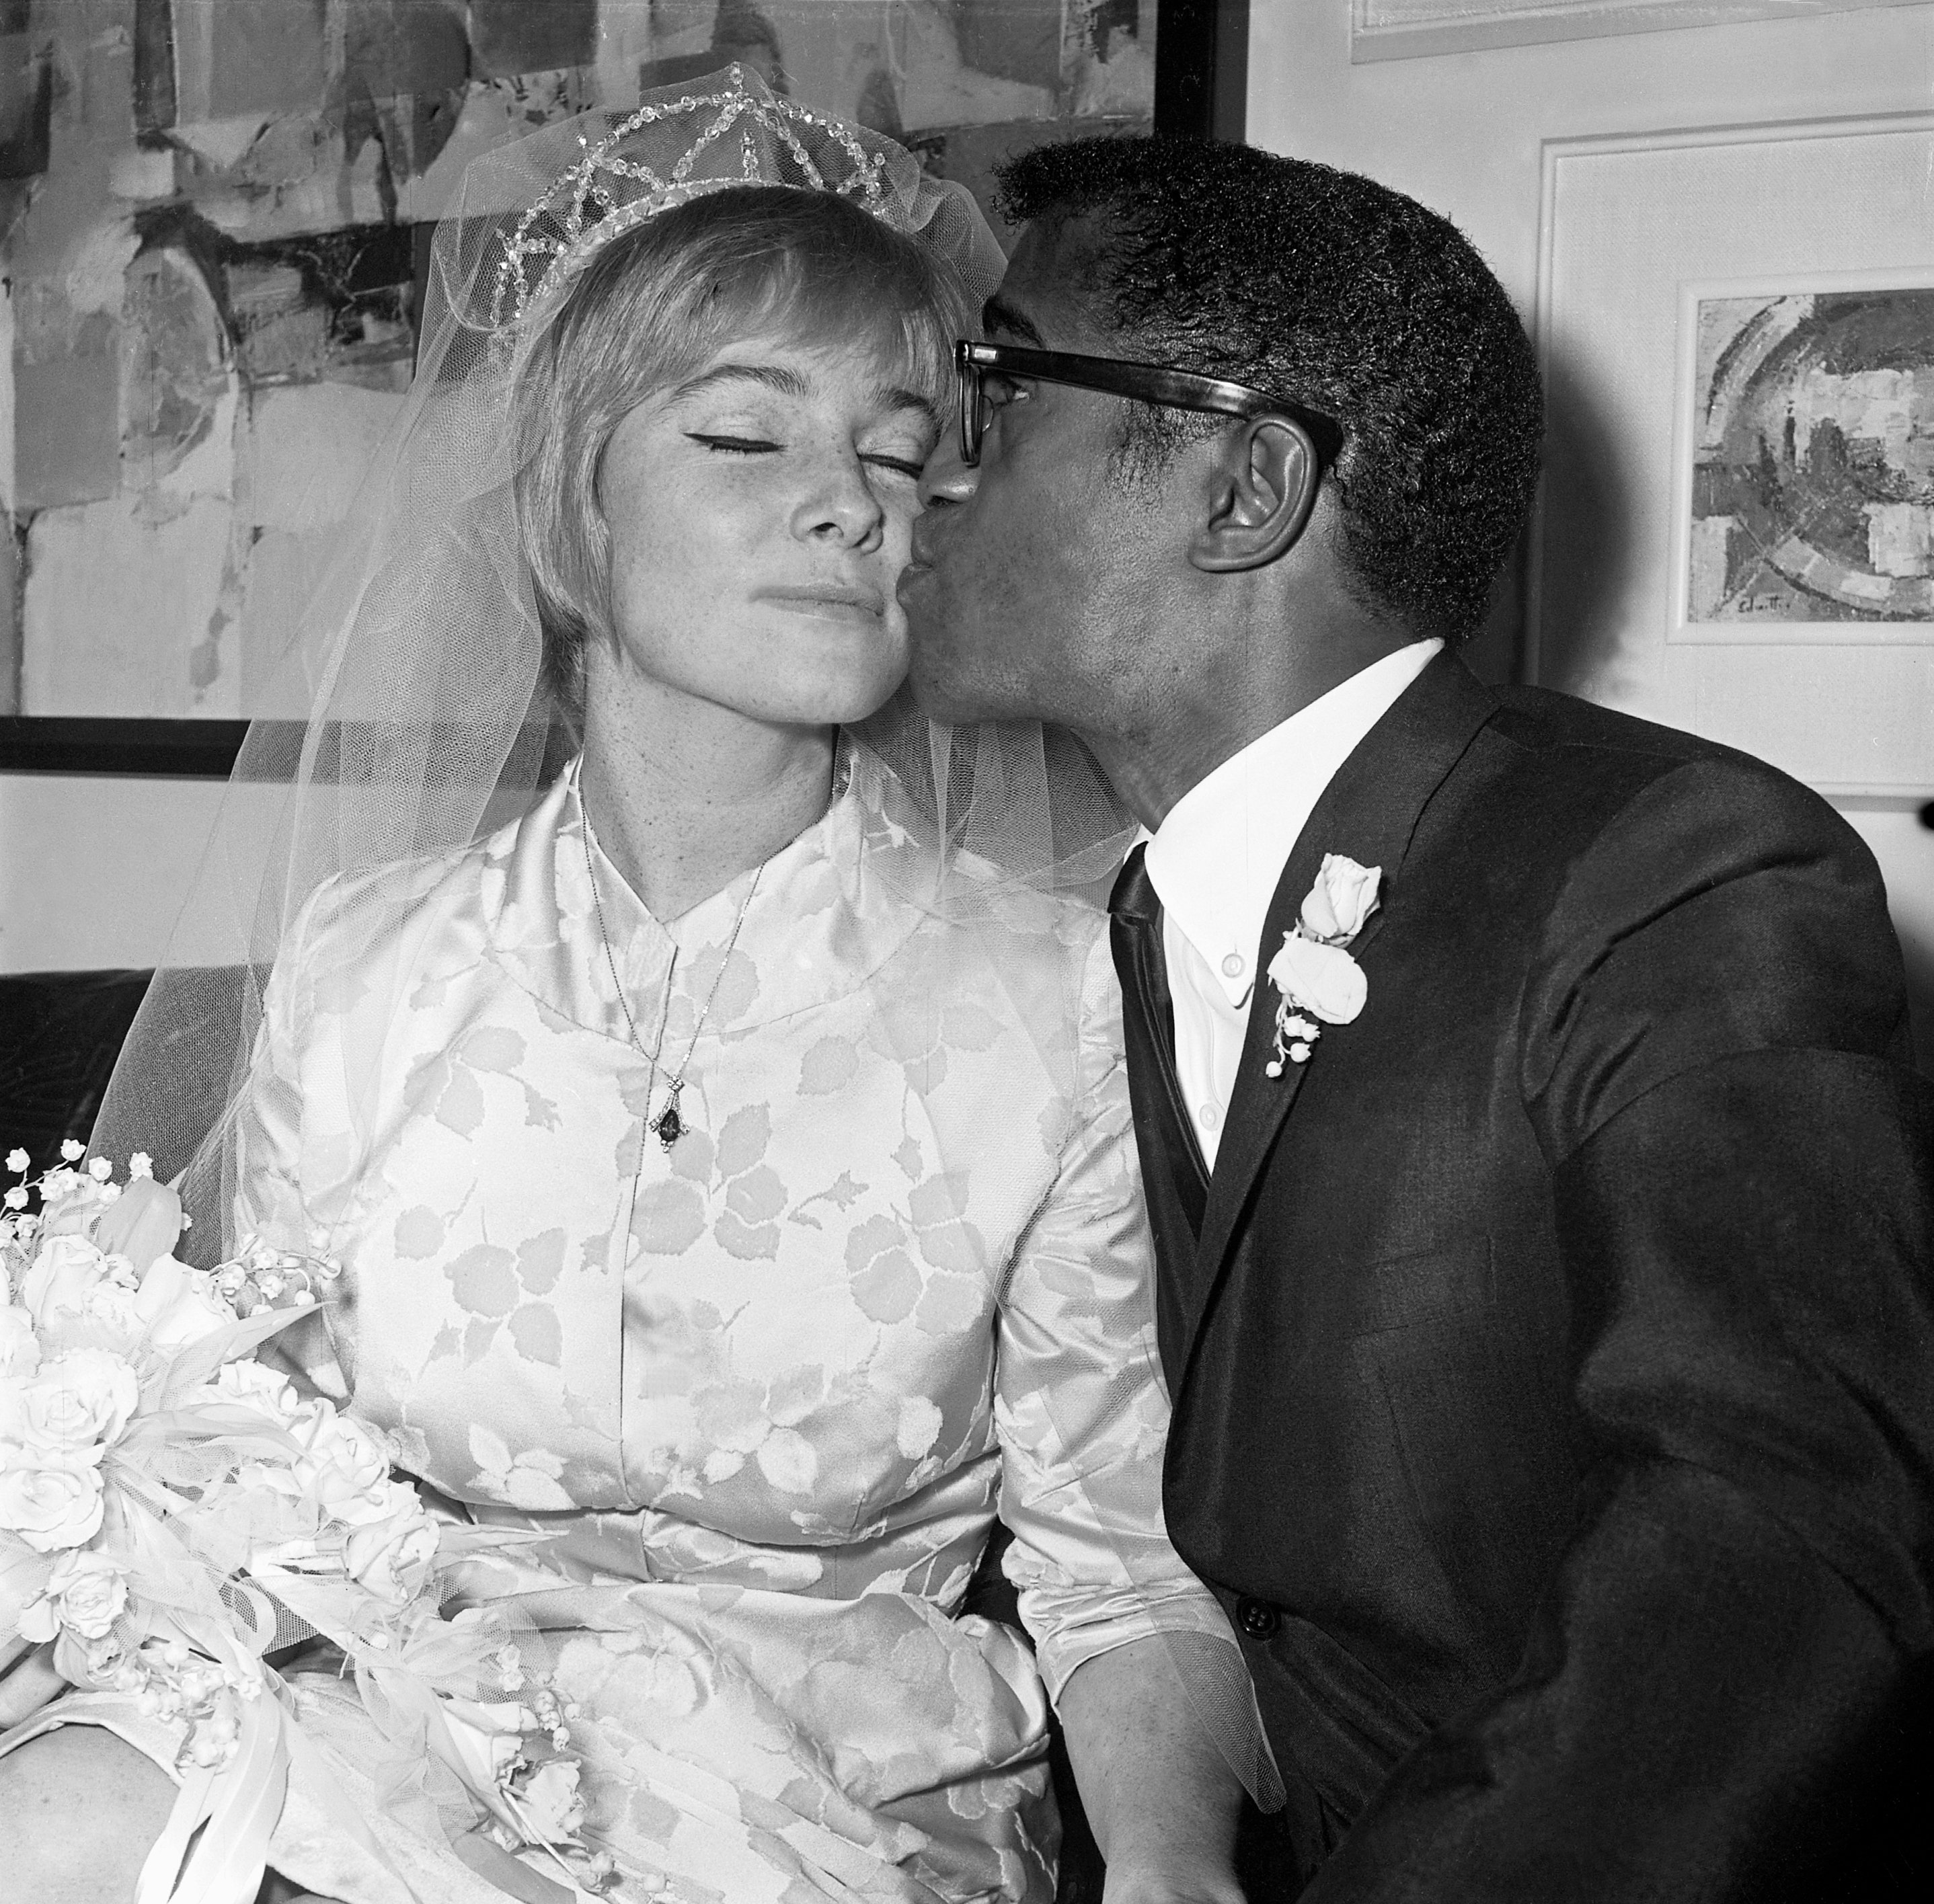 Reception following wedding of May Britt and Sammy Davis, Jr. on November 13, 1960. | Source: Getty Images 